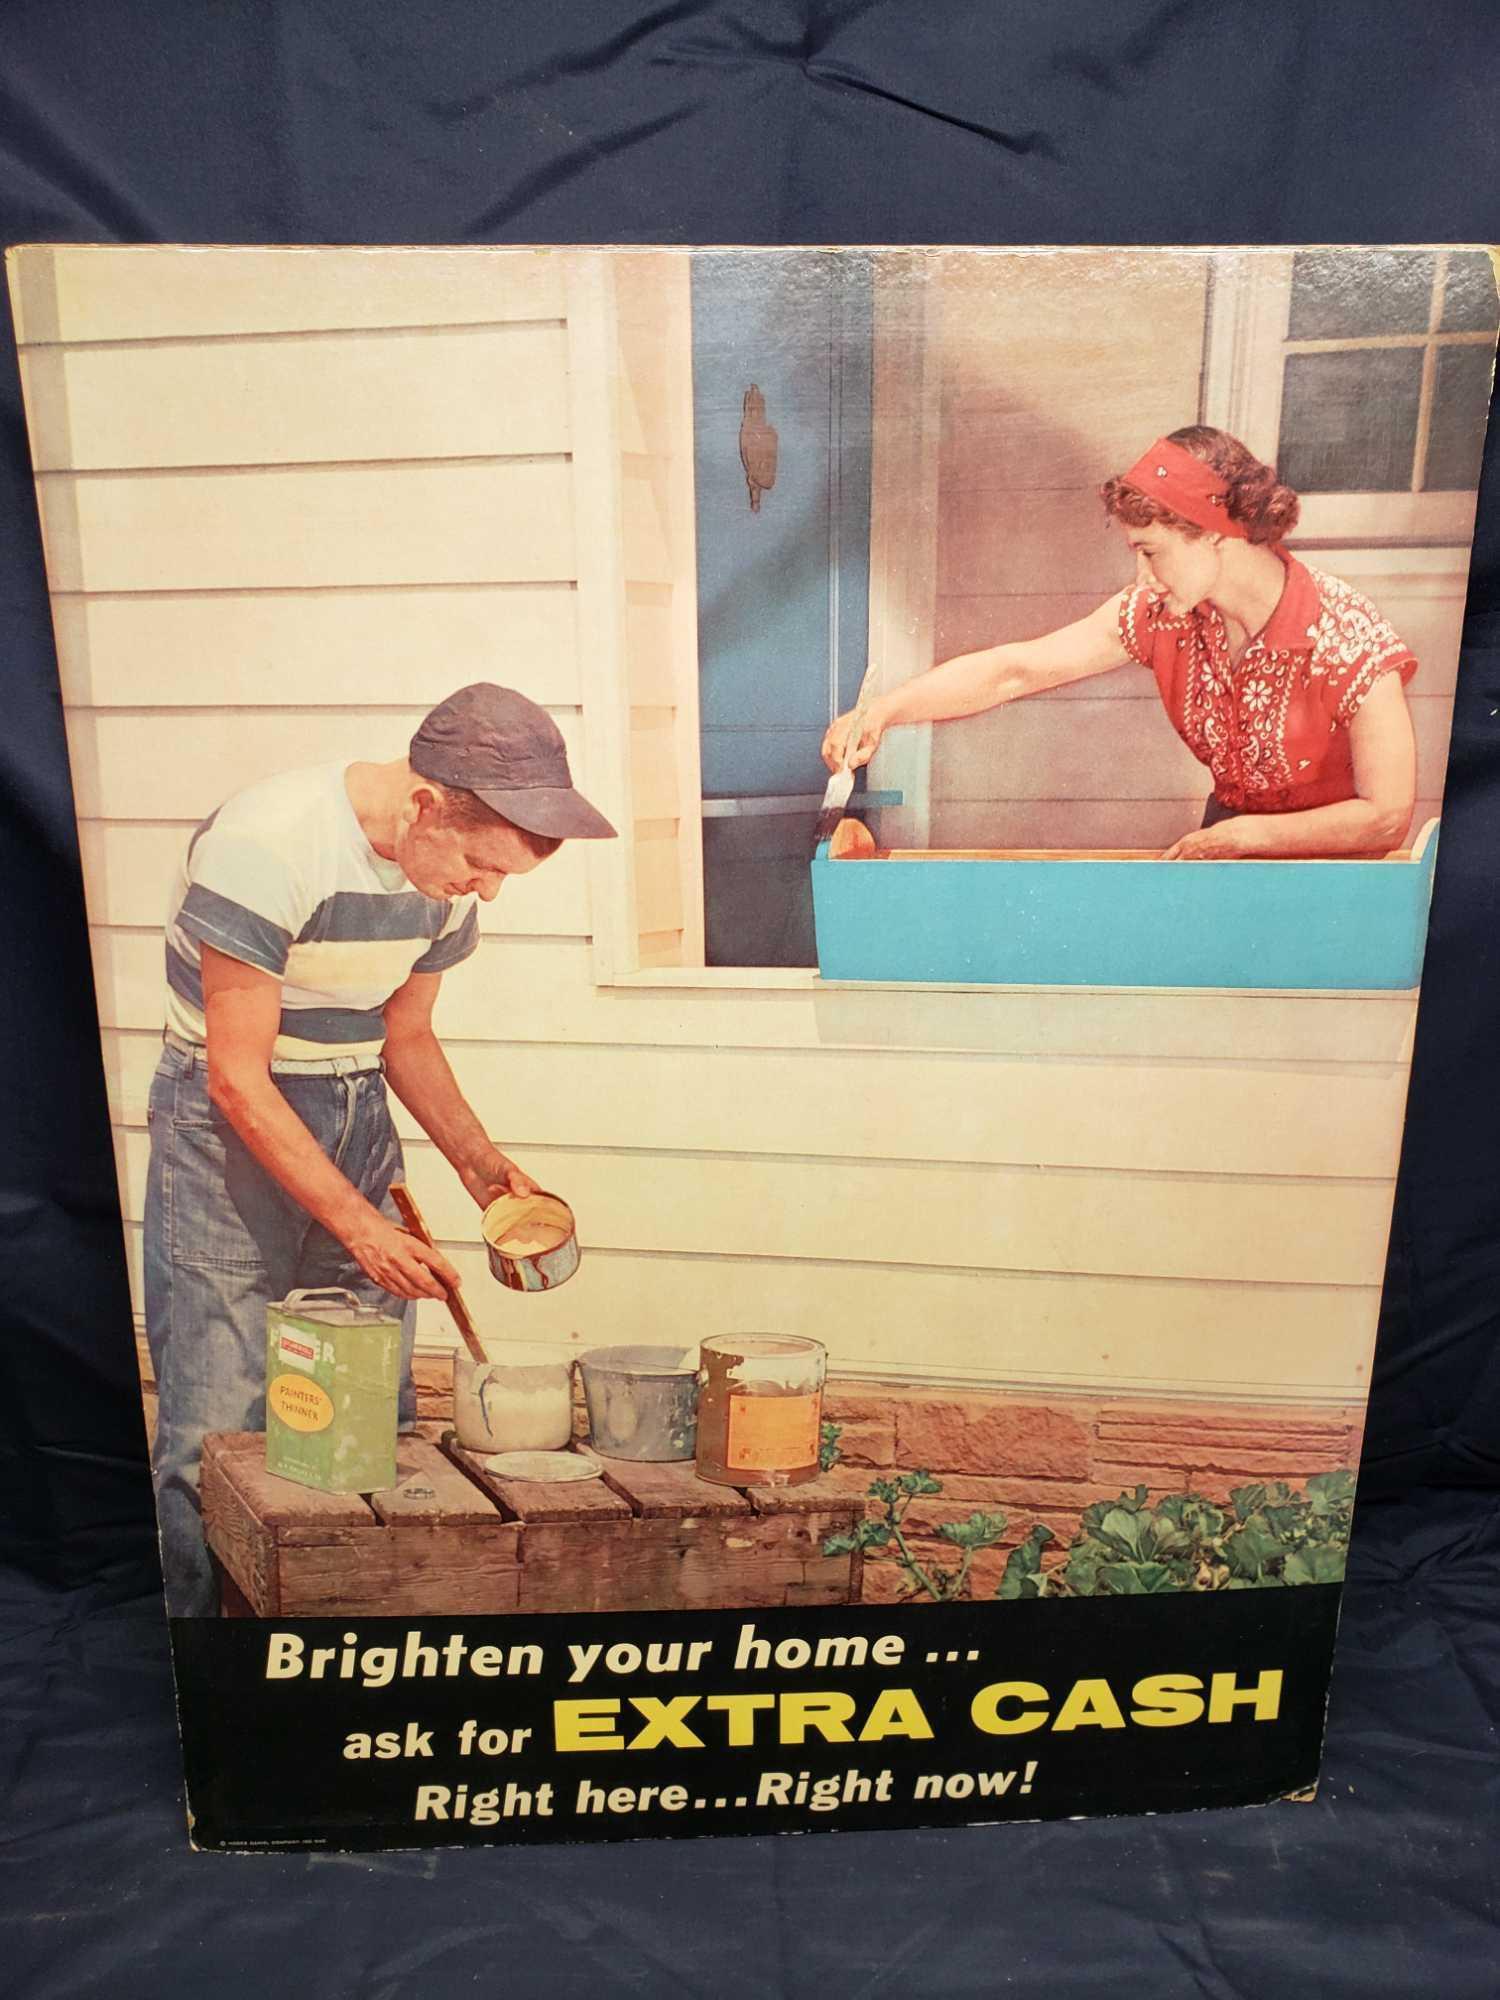 Vintage Ask for Extra Cash advertising posters.